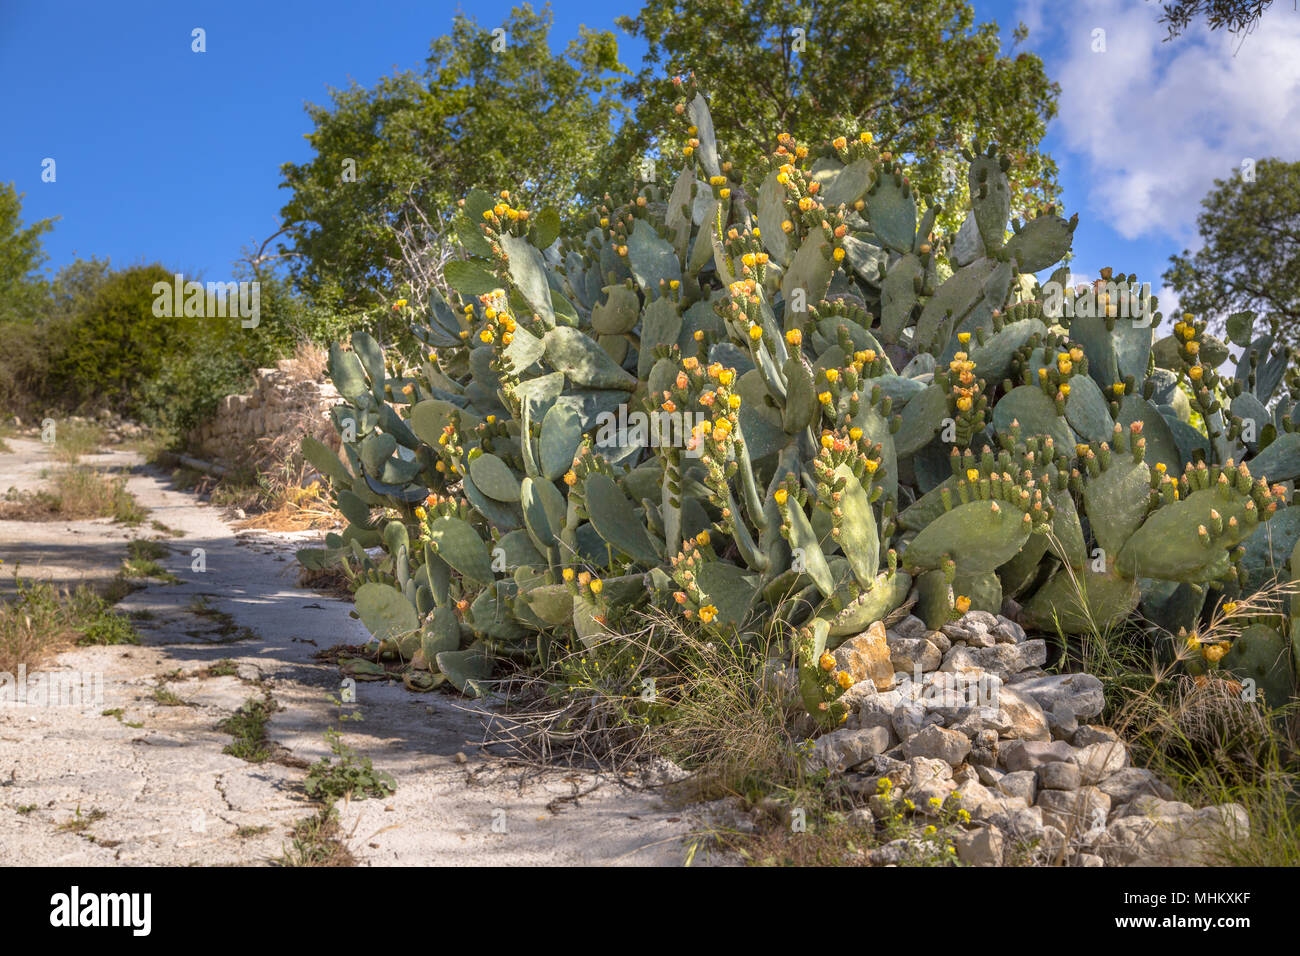 Indian fig cactus (Opuntia ficus-indica, Opuntia ficus-barbarica) can be a pest in some parts of Cyprus Stock Photo